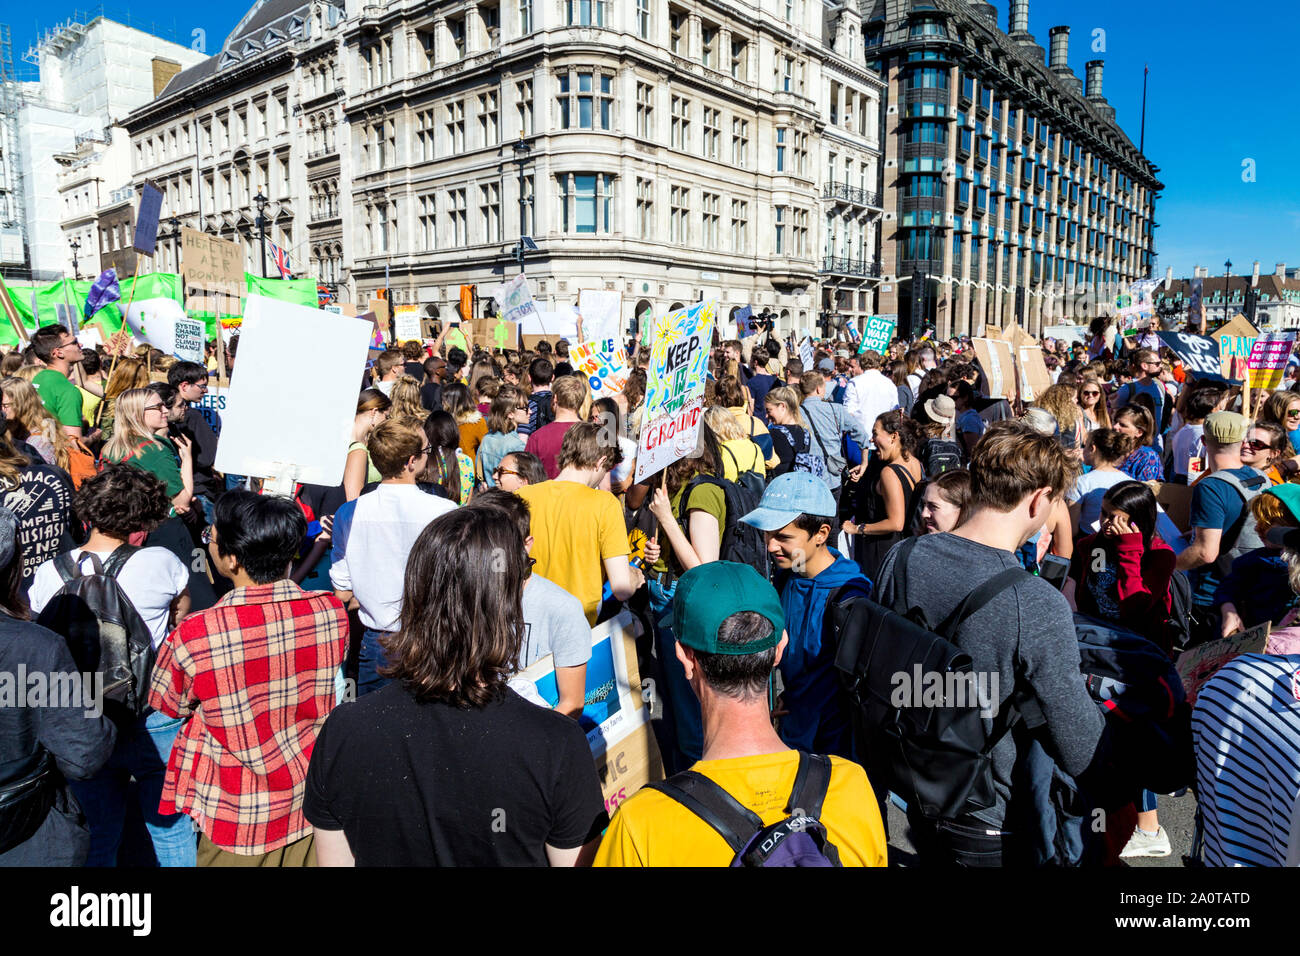 20 September 2019, London, UK - Crowd with signs and placards standing in Parliament Square Garden, Global Climate Strike in Westminster Stock Photo